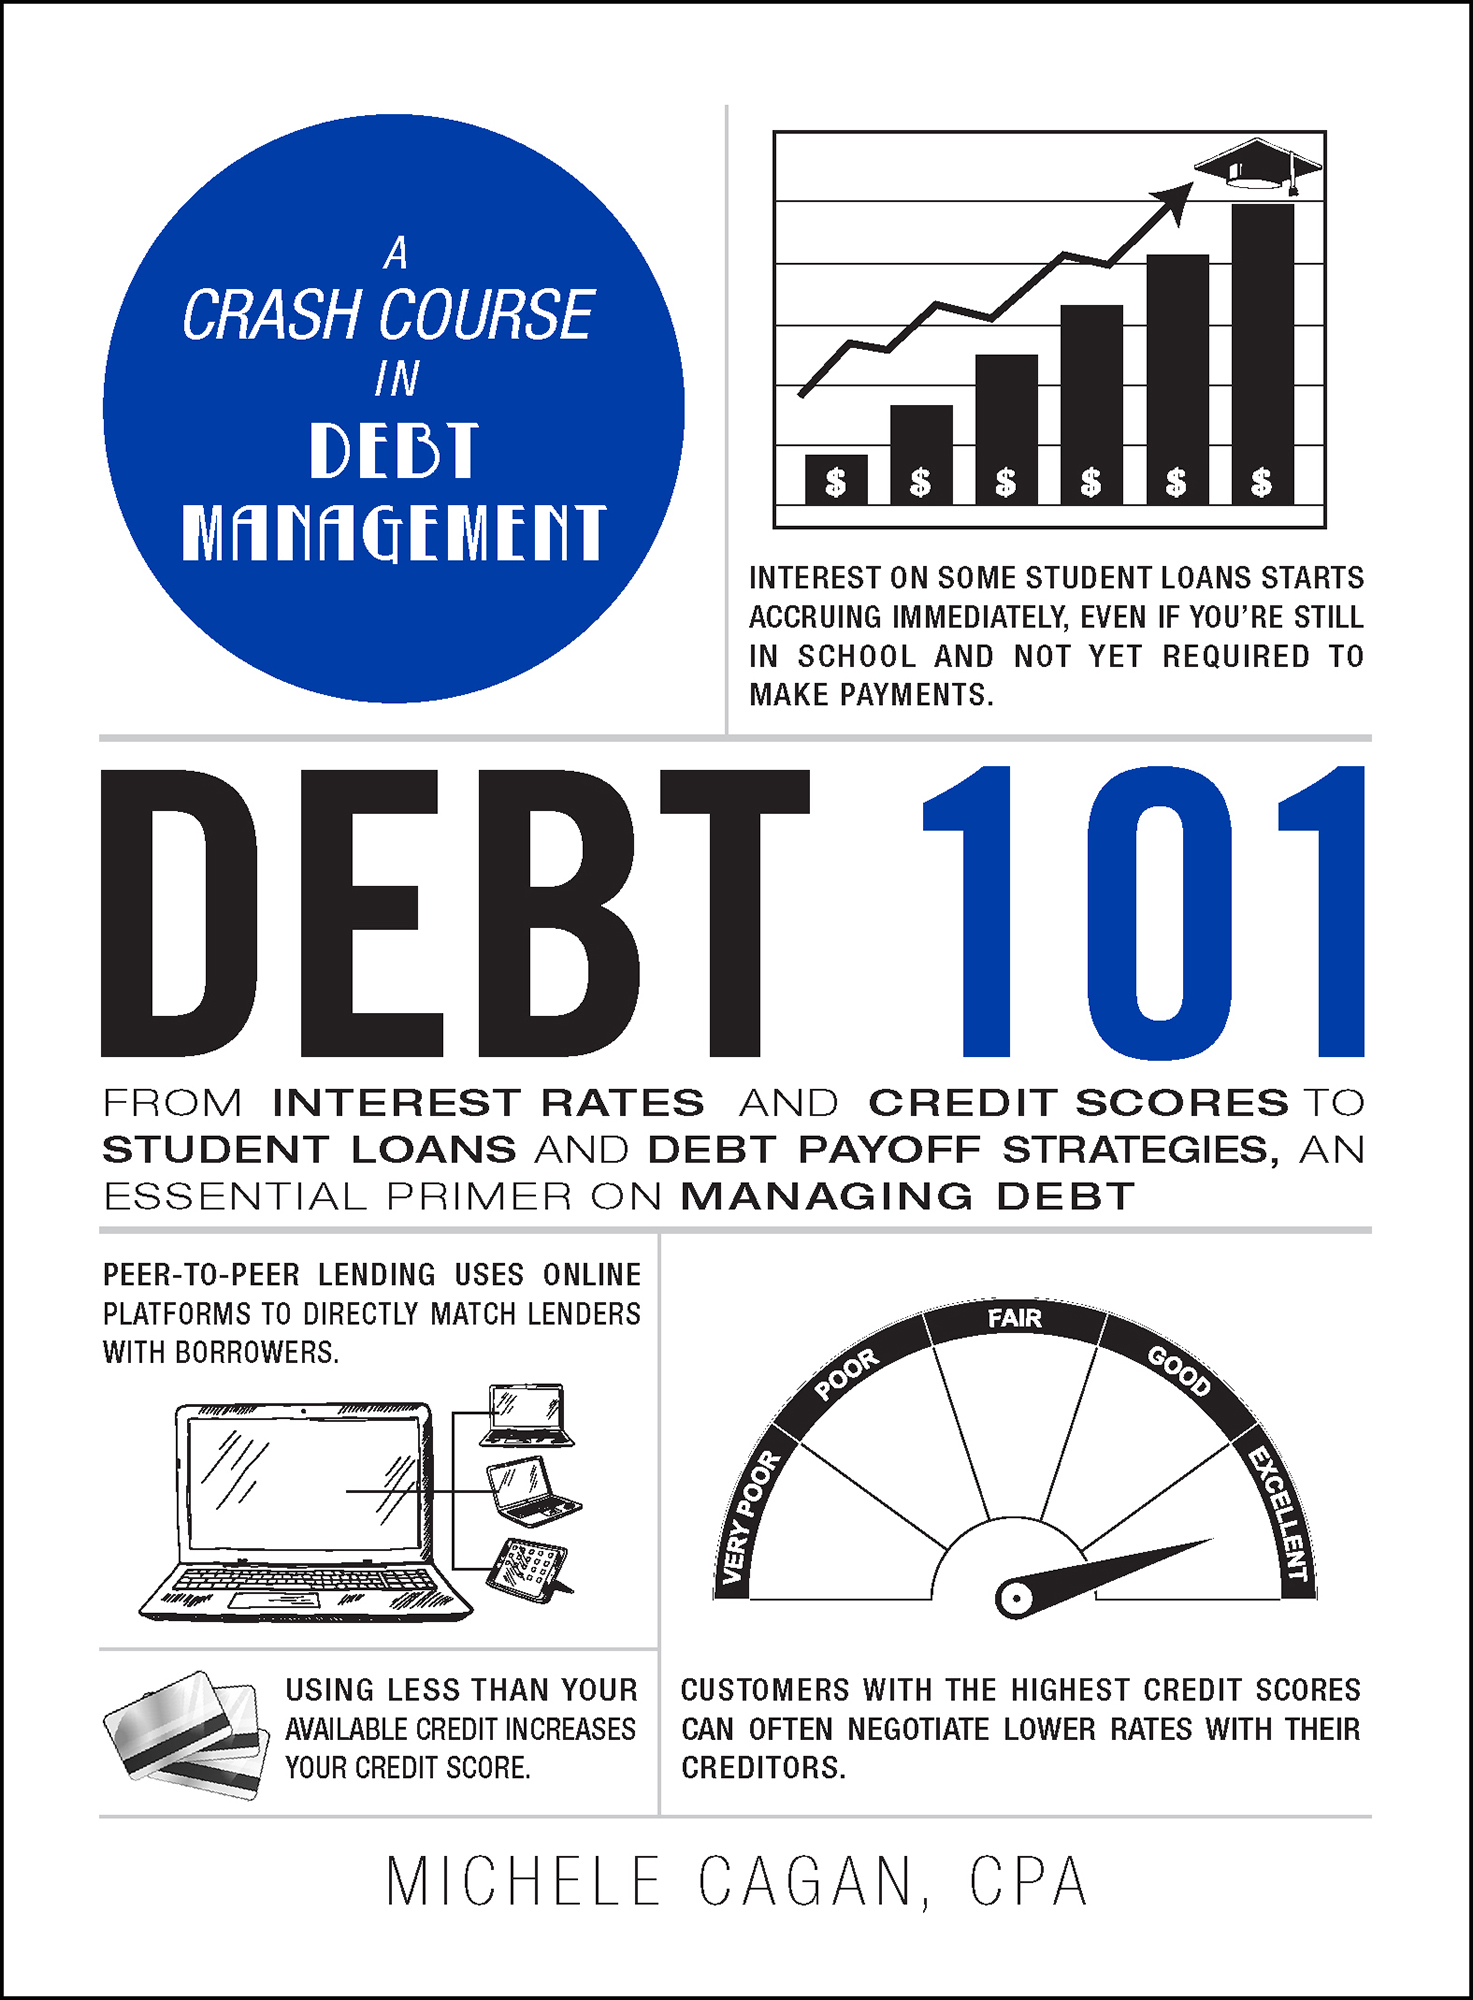 Debt 101 From Interest Rates and Credit Scores to Student Loans and Debt Payoff Strategies an Essential Primer on Managing Debt - image 1